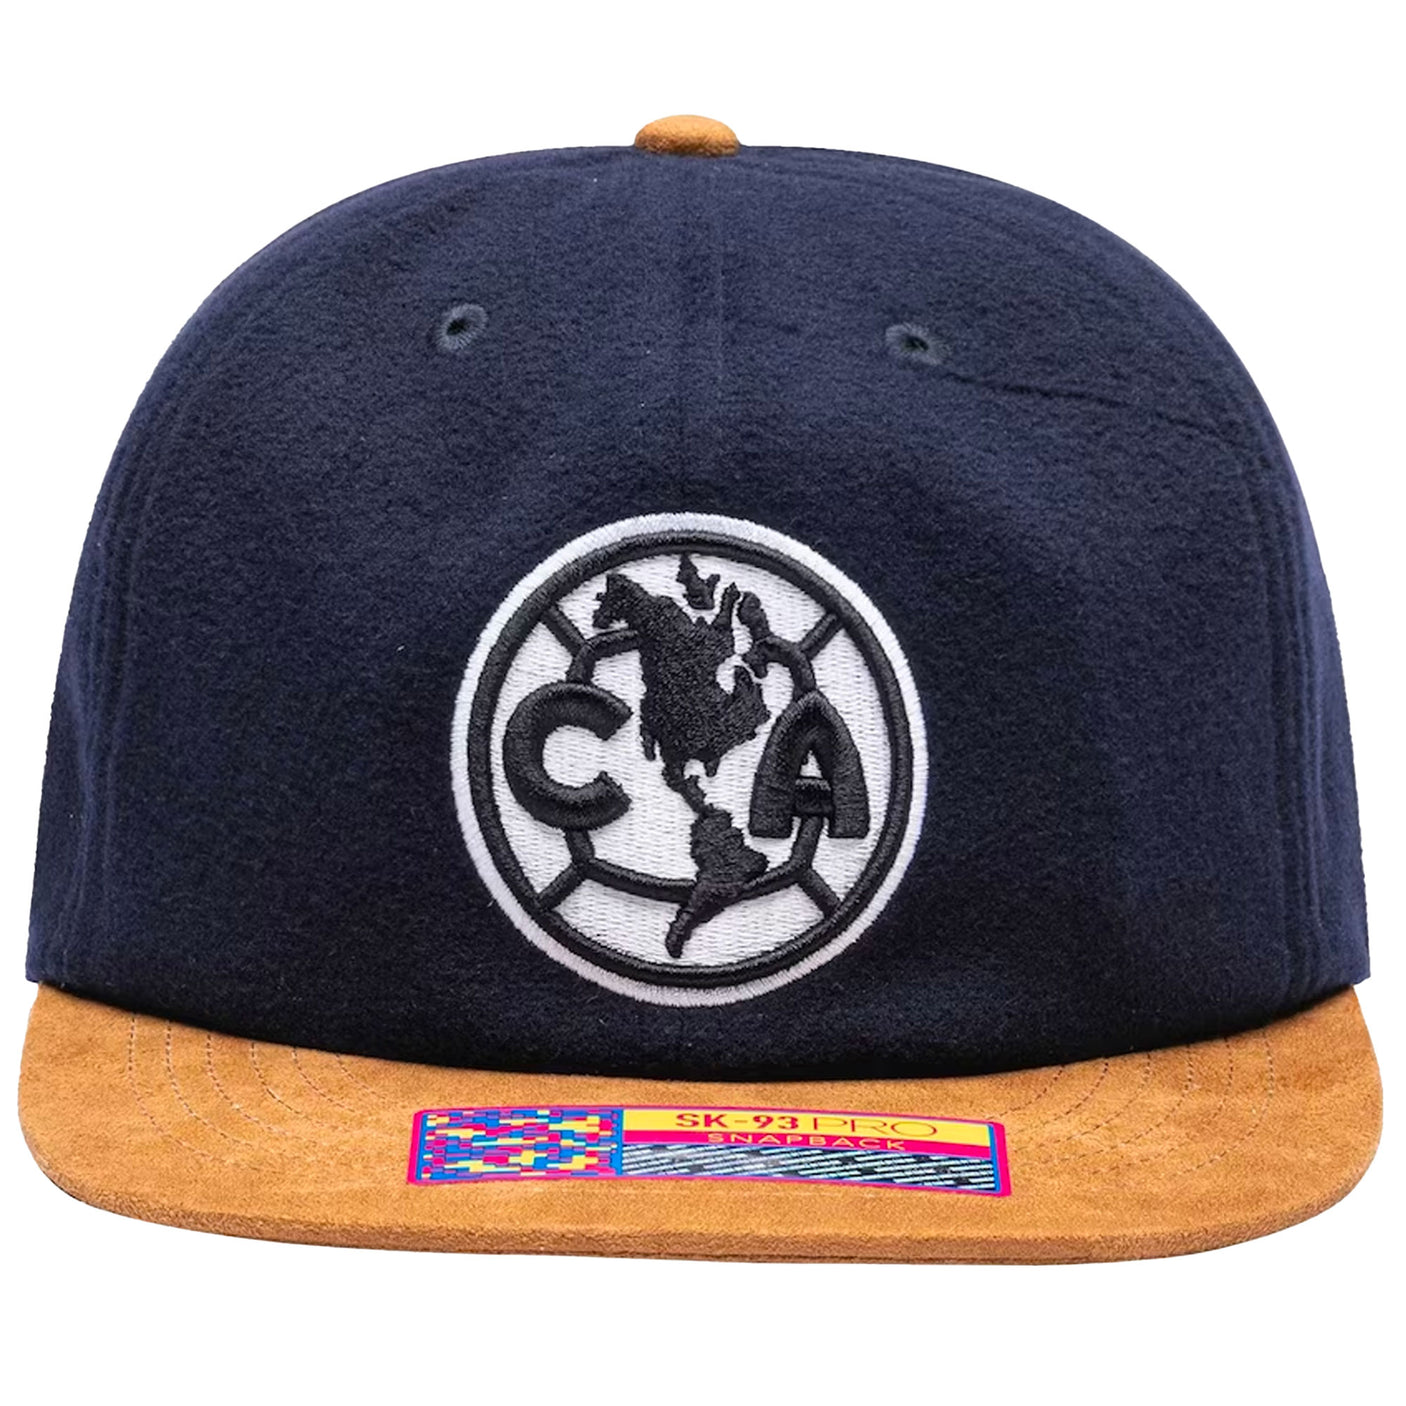 Fan Ink Club America Snap Back Hat Navy/Brown Front